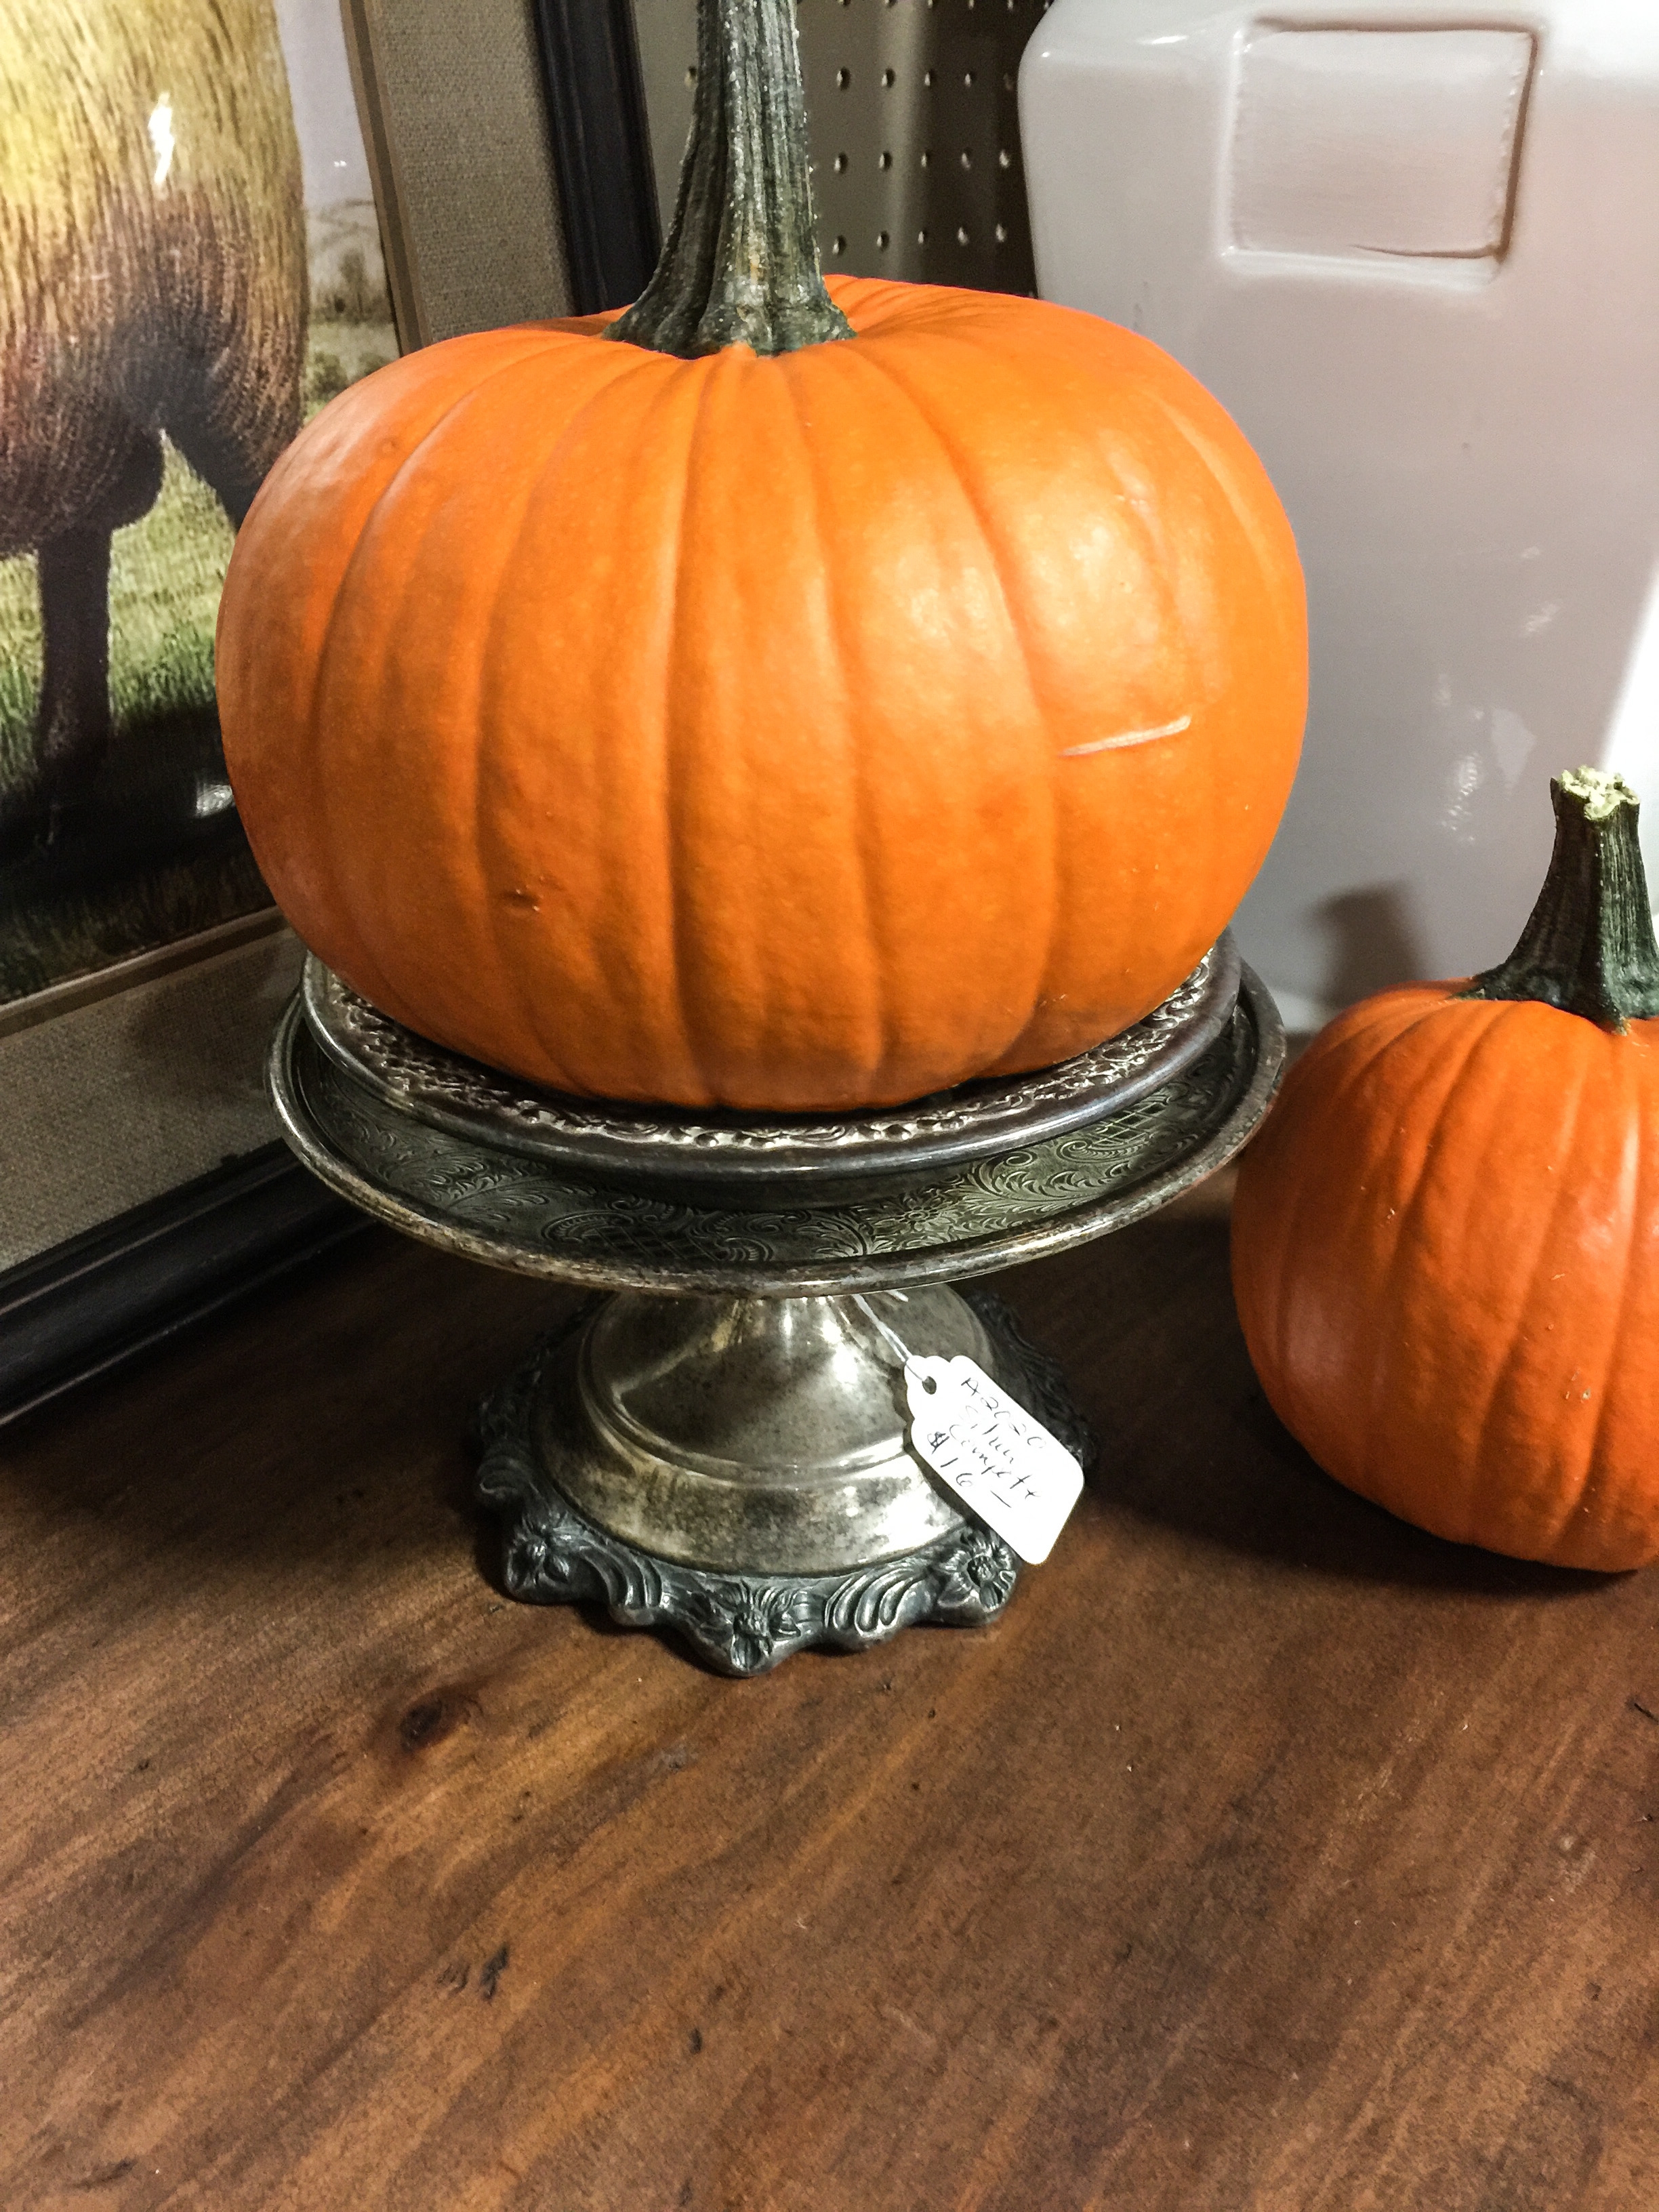 My Shop Update With A Few Fall Touches